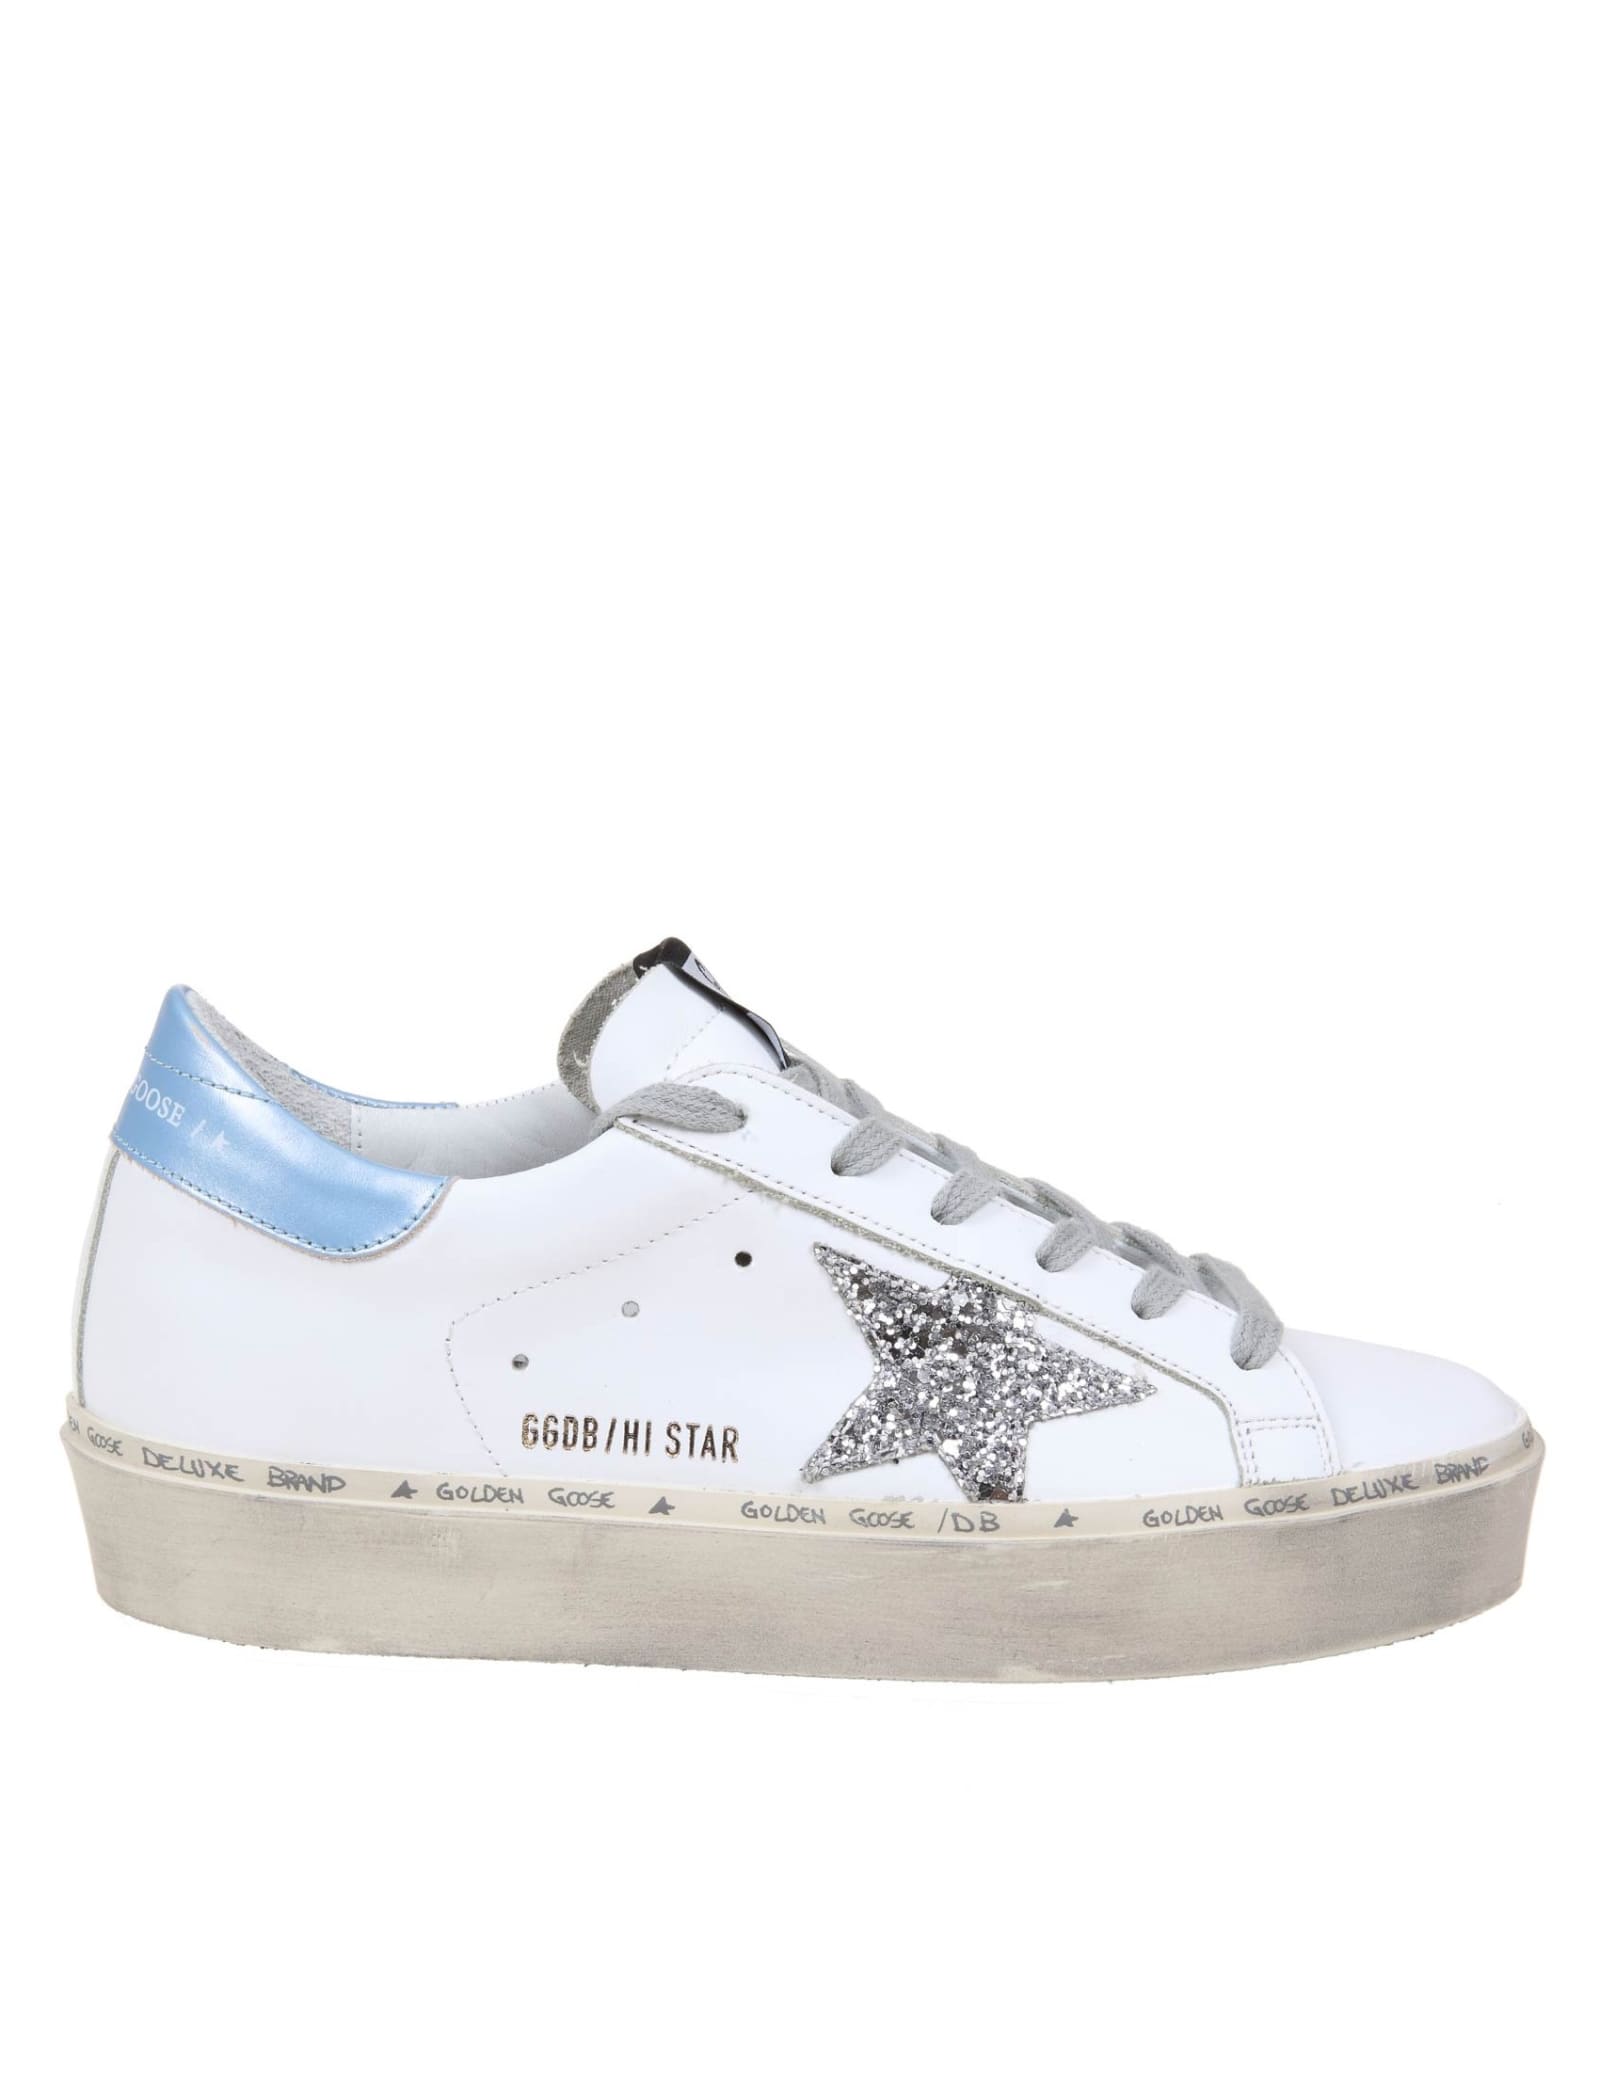 GOLDEN GOOSE HI STAR SNEAKERS IN WHITE LEATHER,11794435